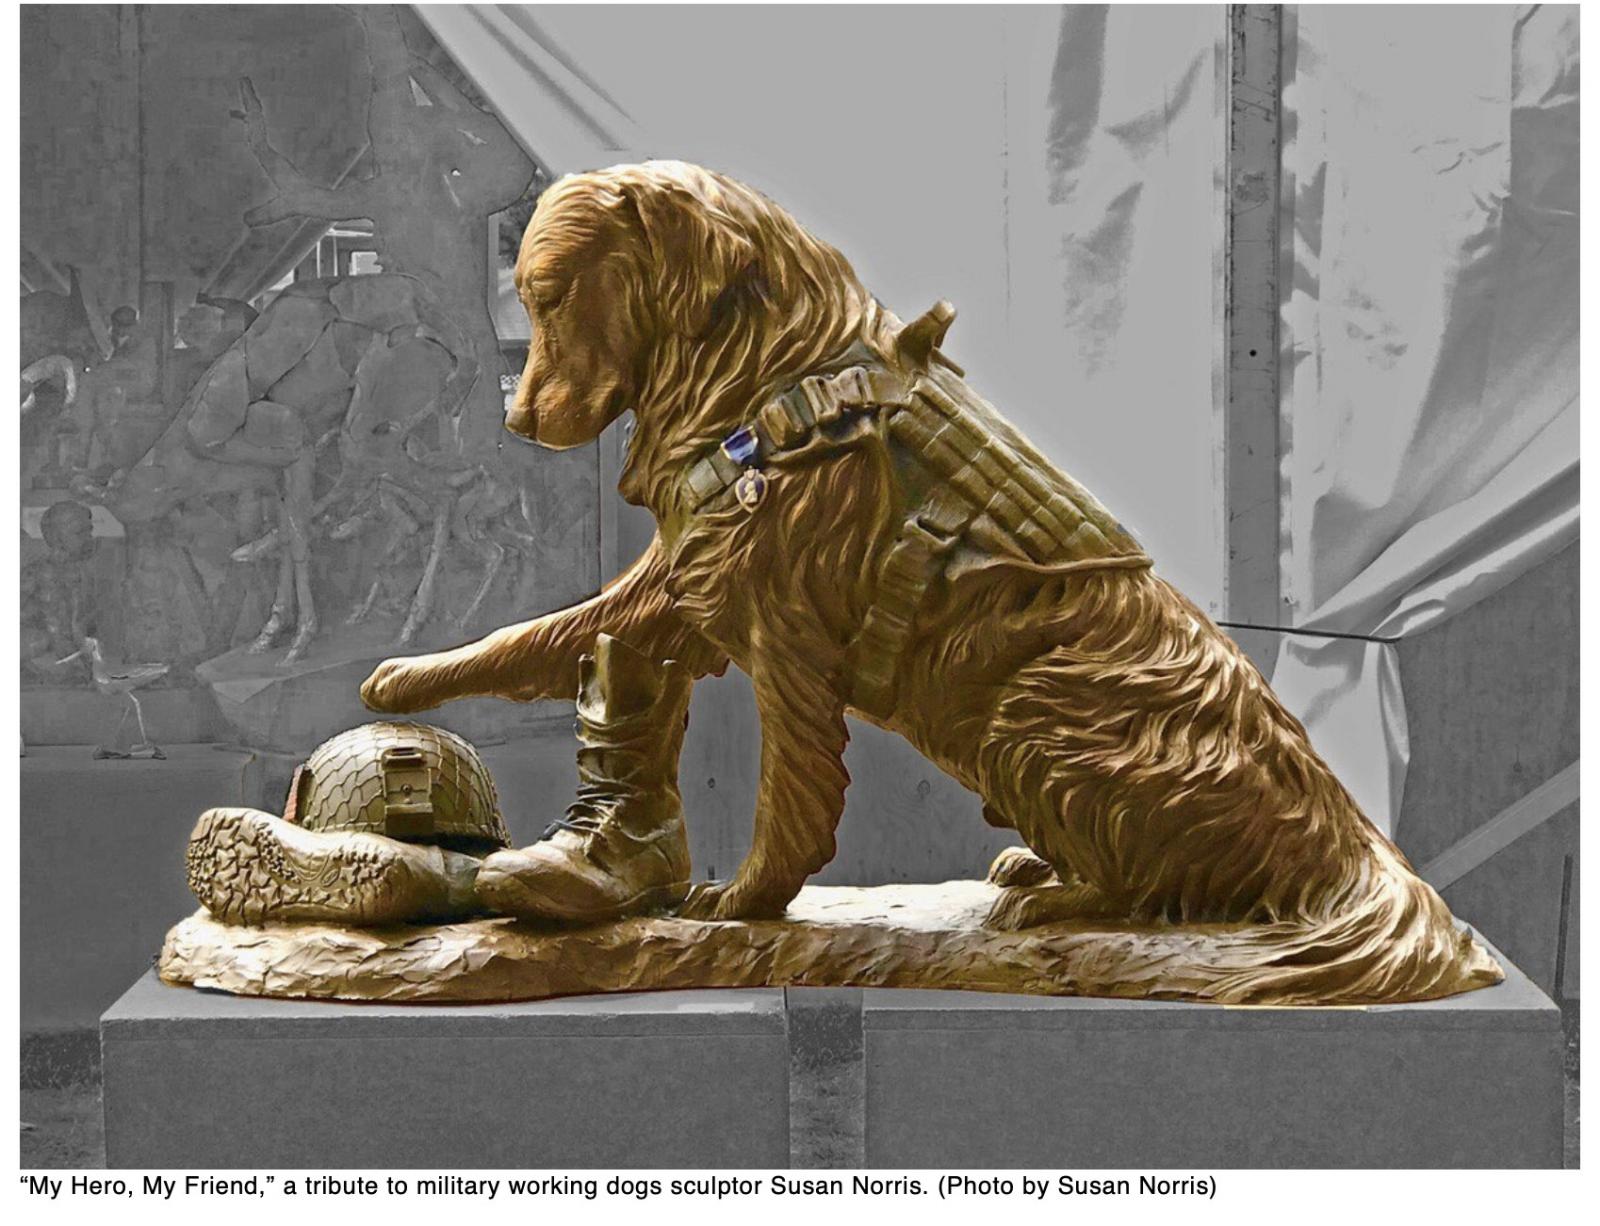  New sculpture pays tribute to military working dogs